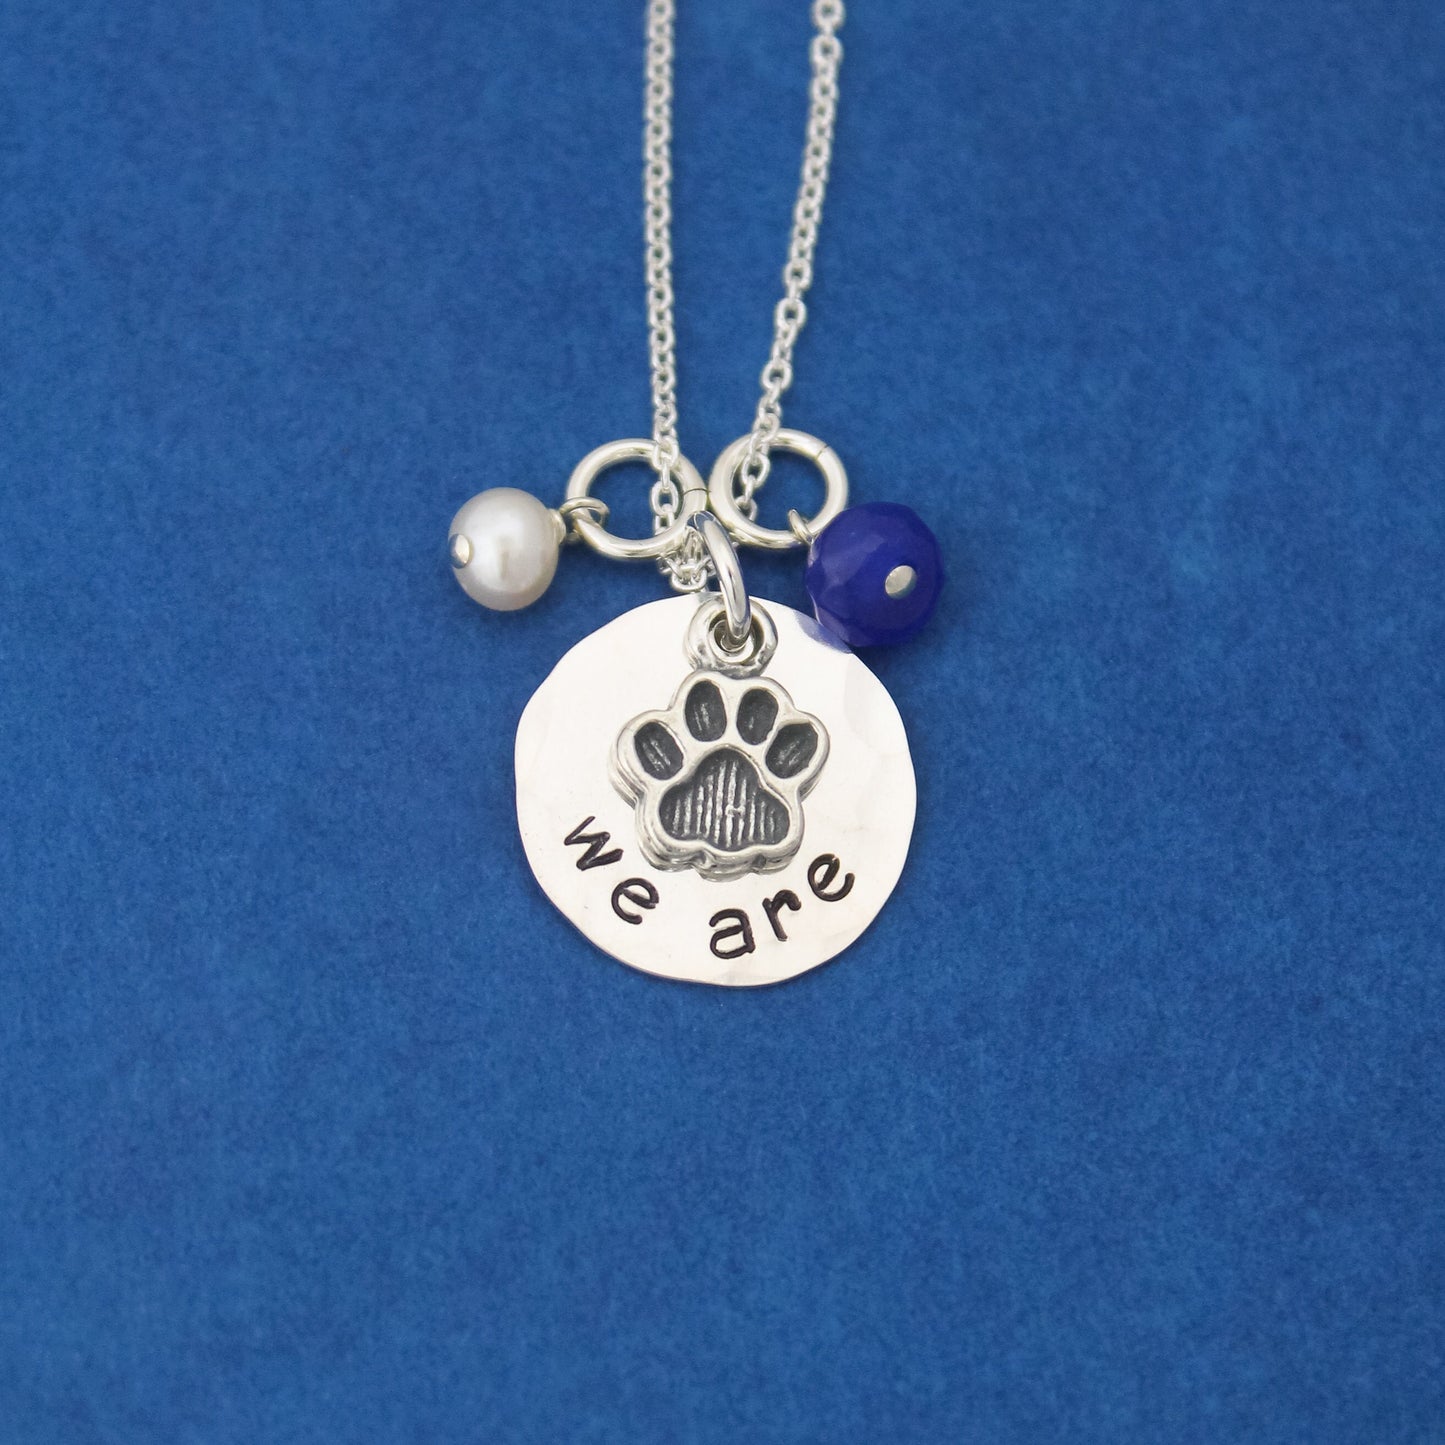 We Are Necklace, Penn State Necklace, Nittany Lions Gift, PSU Grad Gift, Graduation Gift for Penn State, Hand Stamped Jewelry